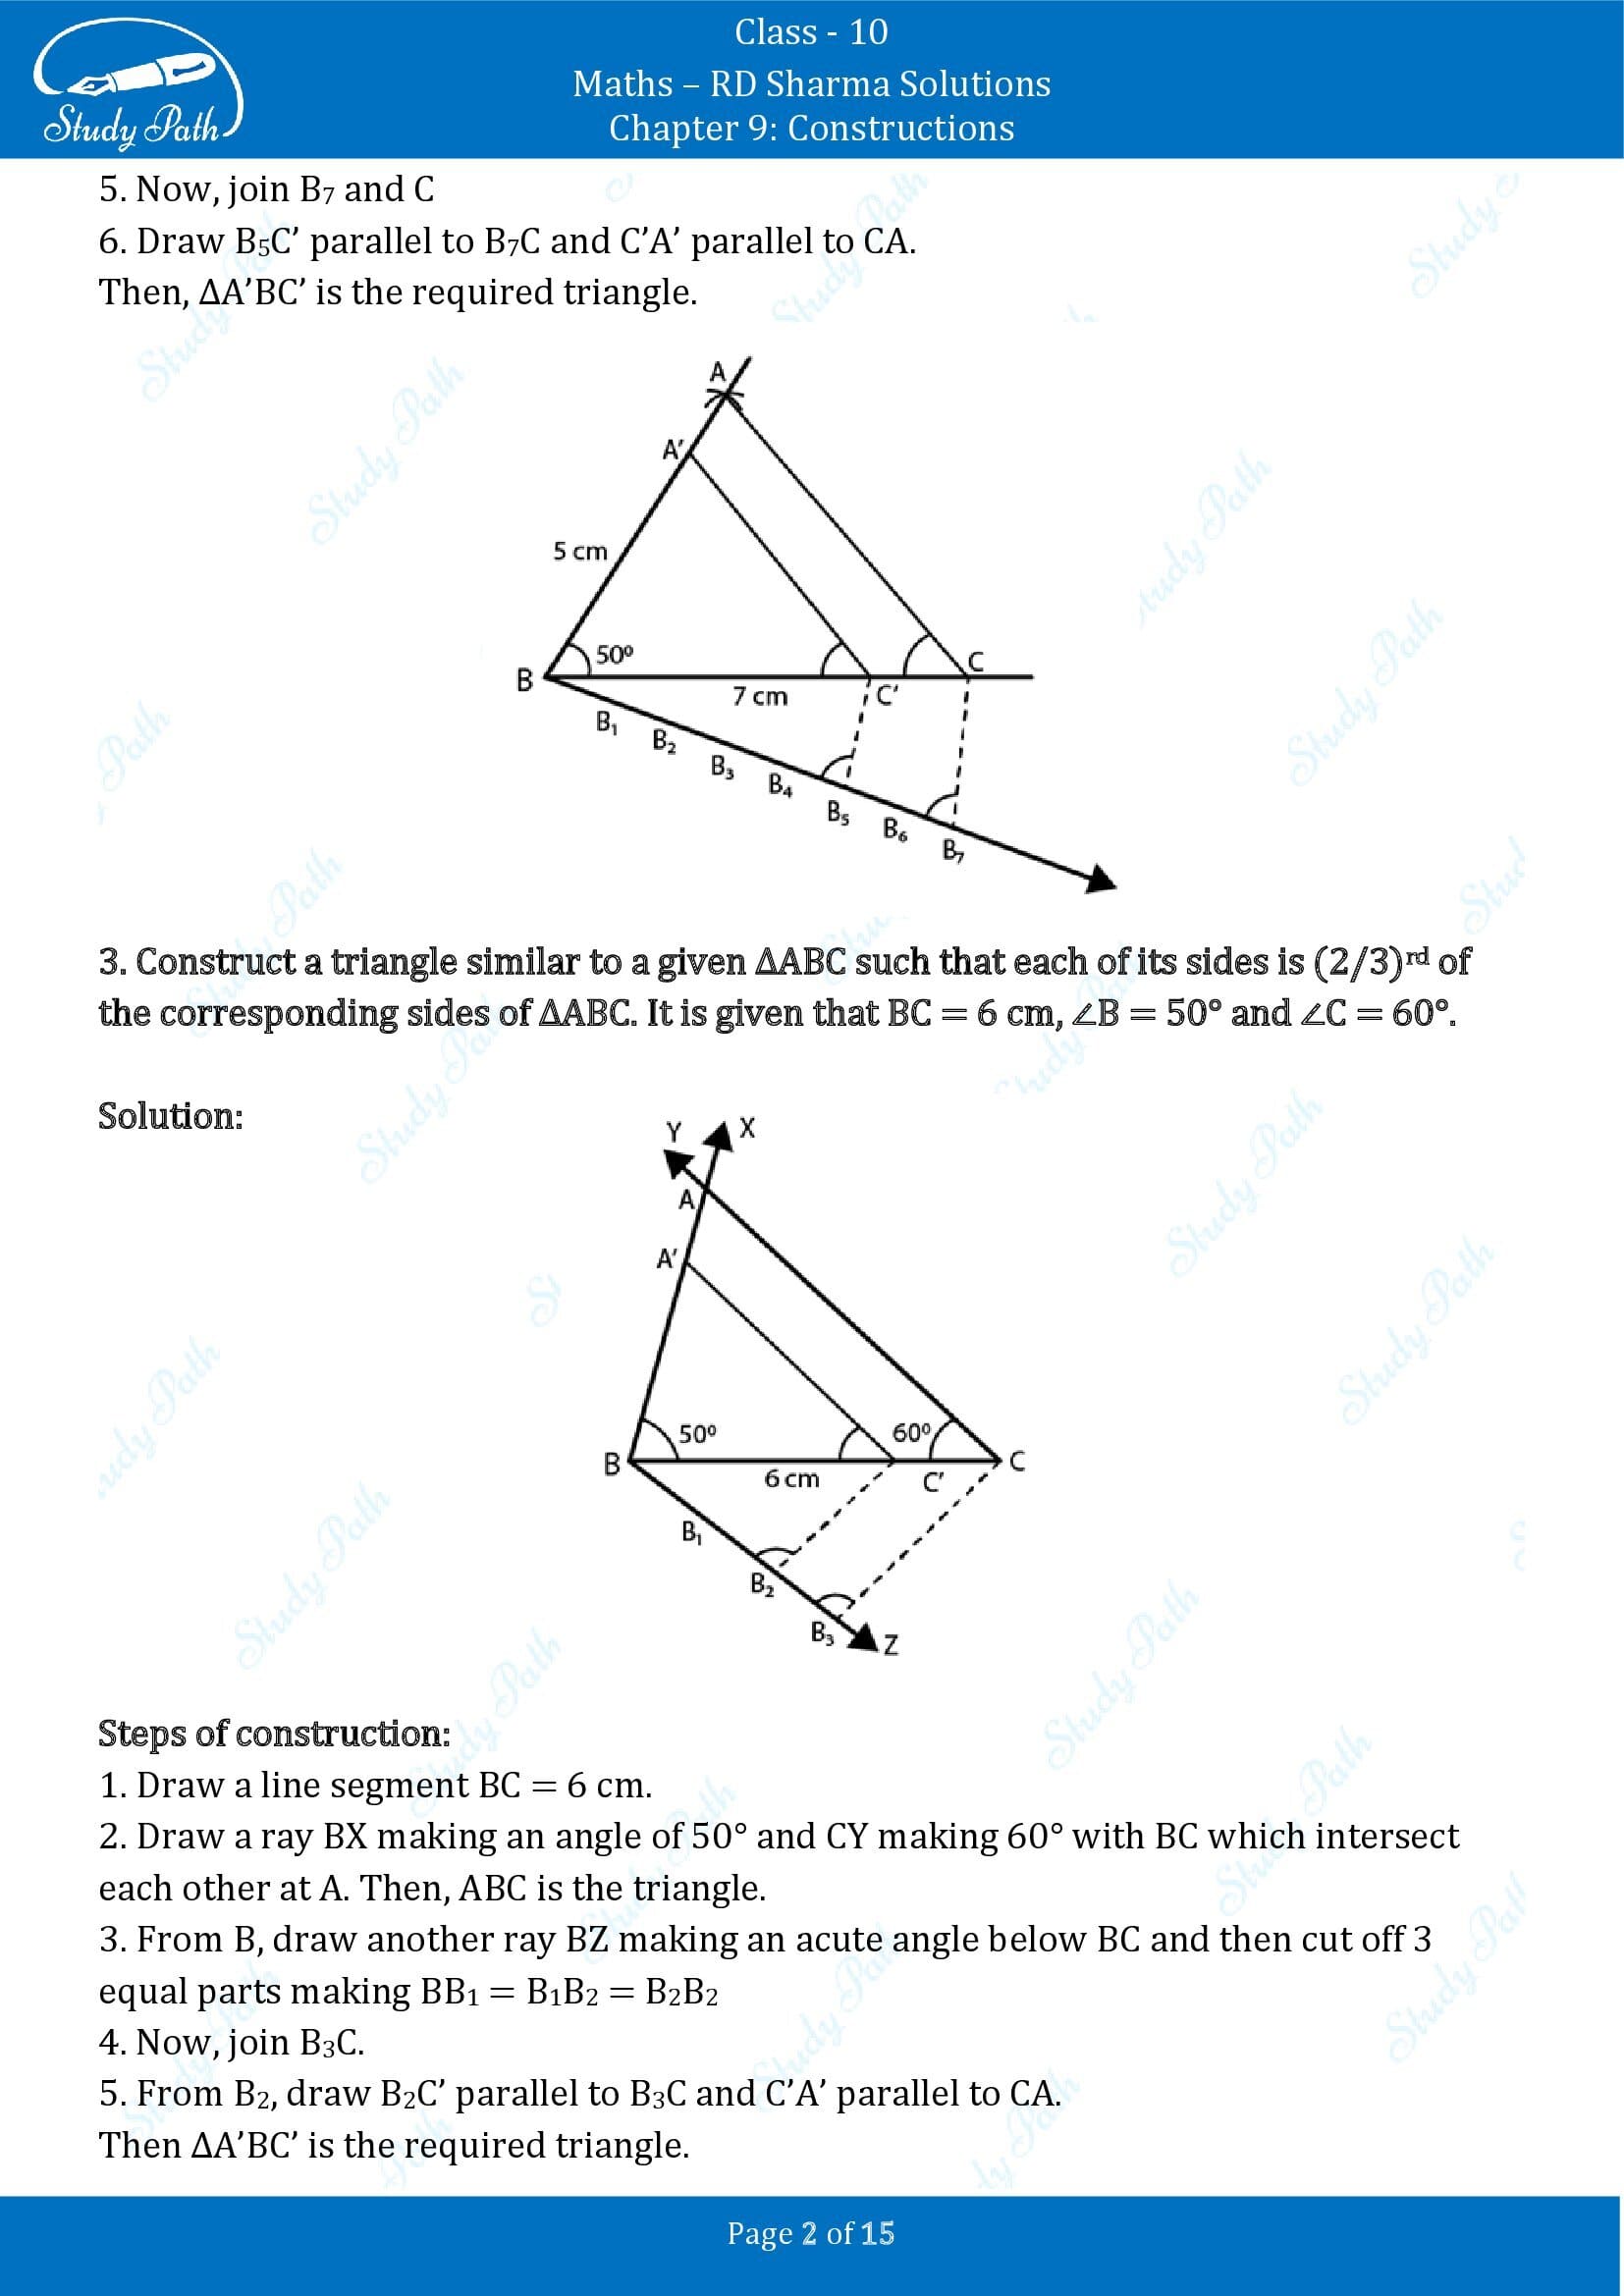 RD Sharma Solutions Class 10 Chapter 9 Constructions Exercise 9.2 00002